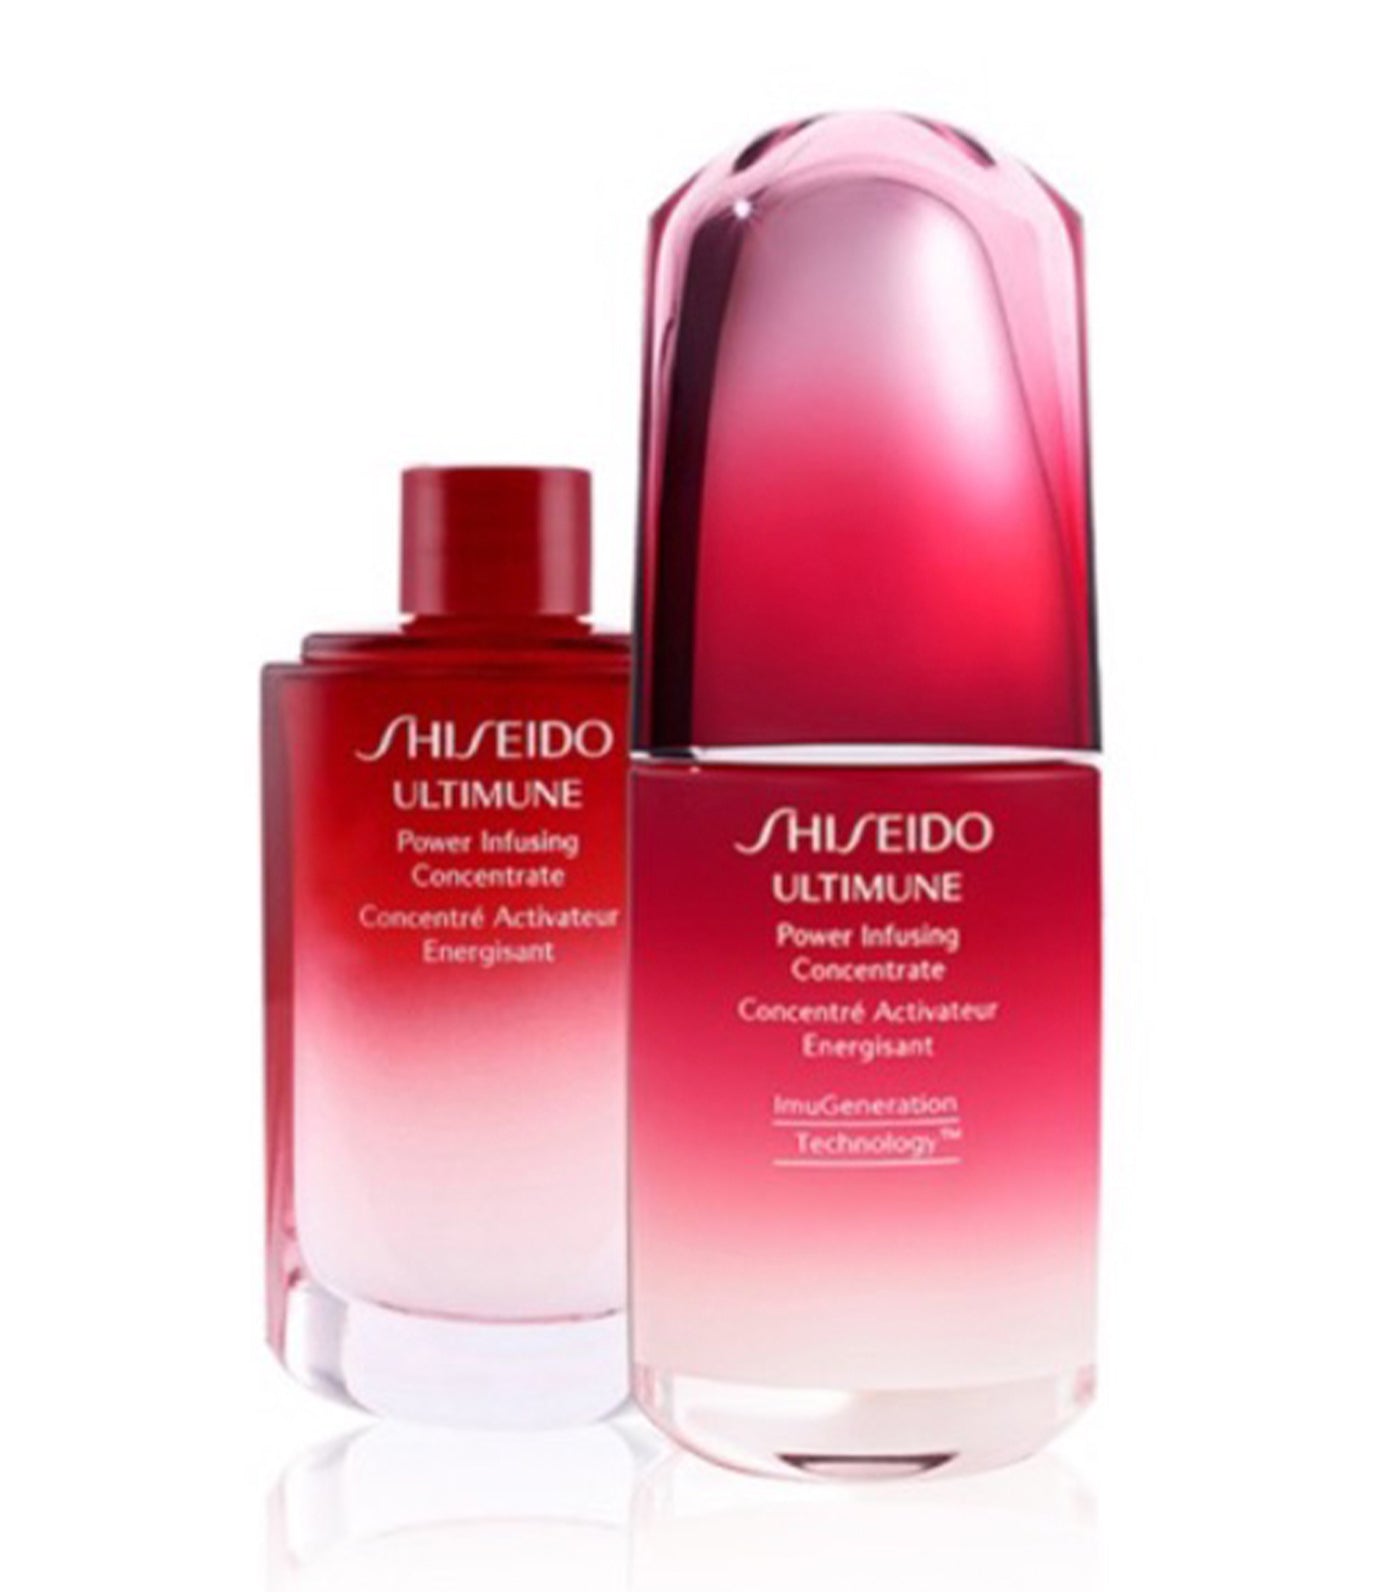 Shiseido Ultimune Power Infusing Concentrate Duo